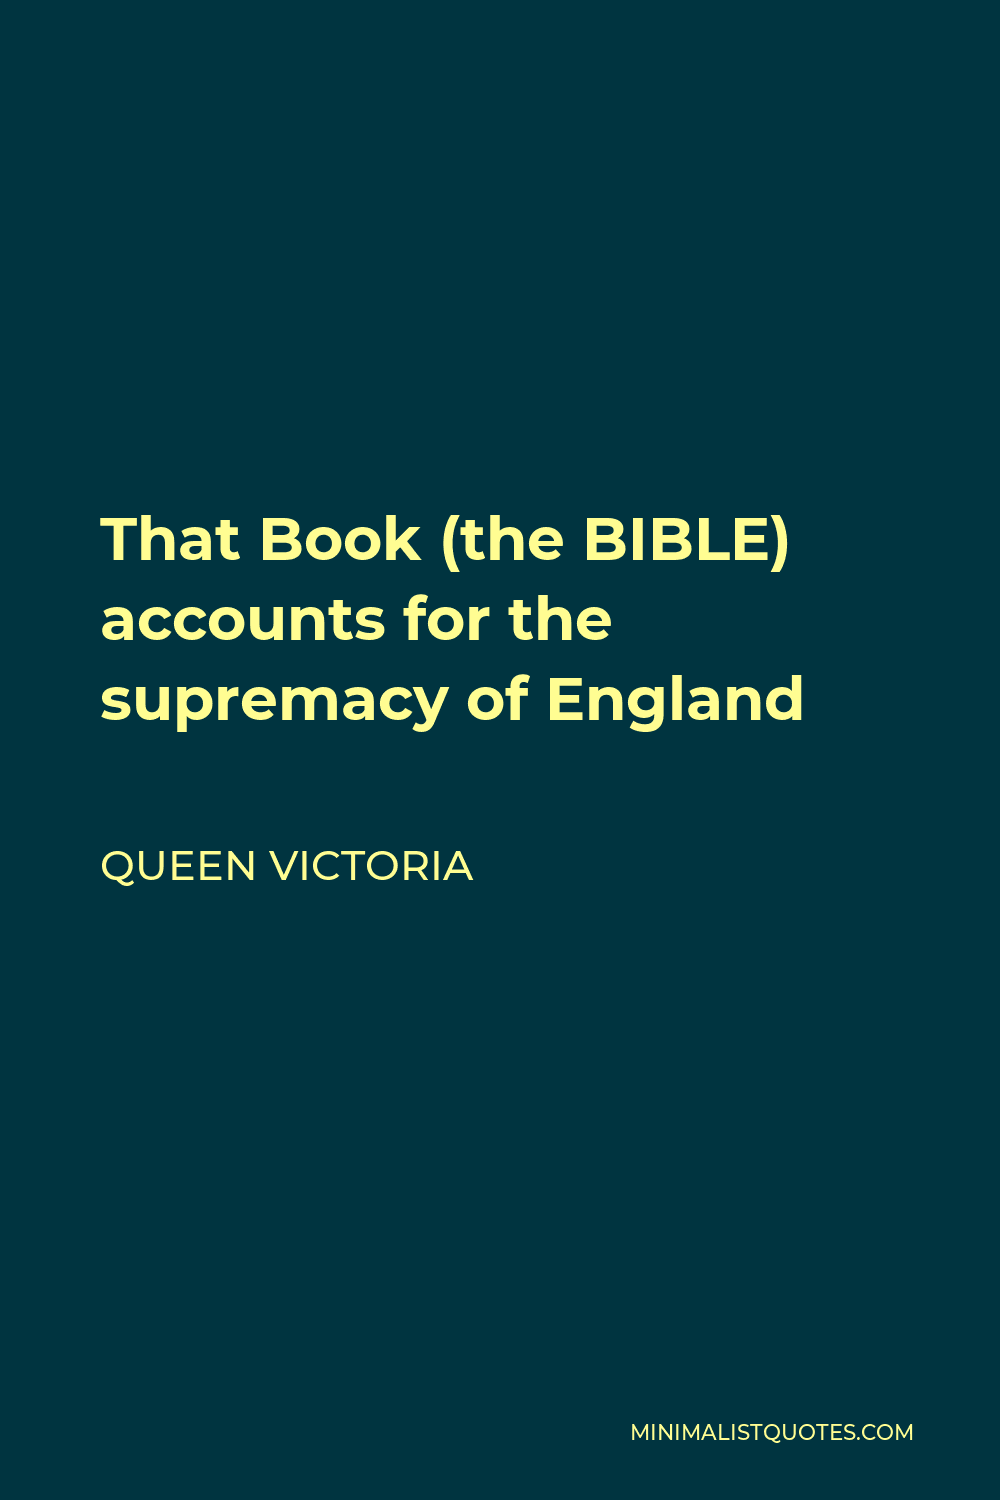 Queen Victoria Quote - That Book, the Bible, accounts for the supremacy of England. England has become great & happy by the knowledge of the true God through Jesus Christ.